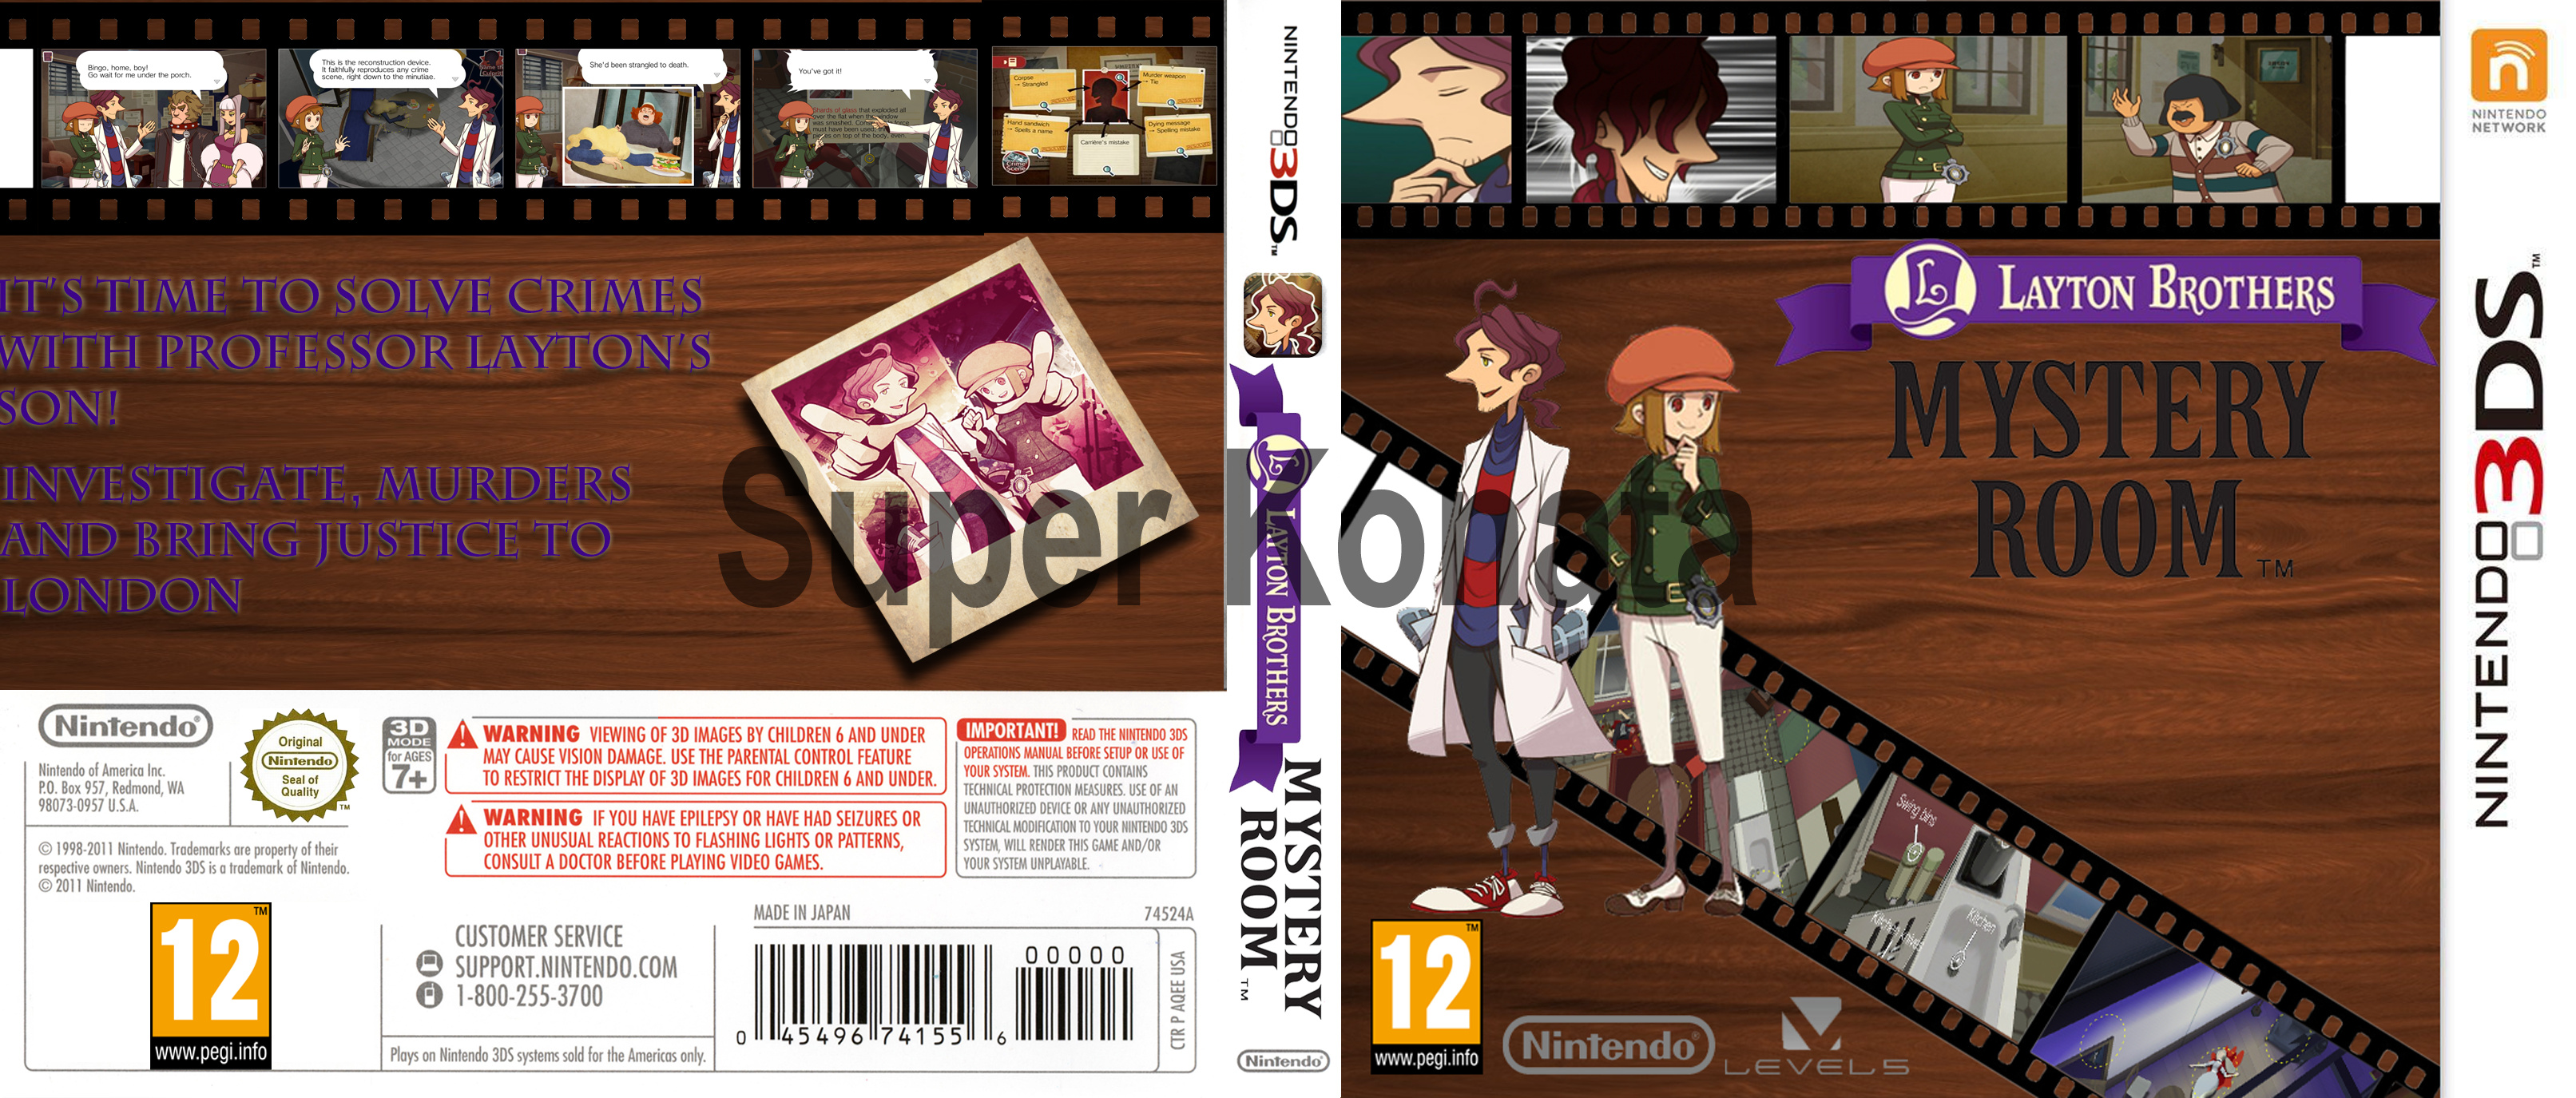 Layton Brothers: Mystery Room box cover